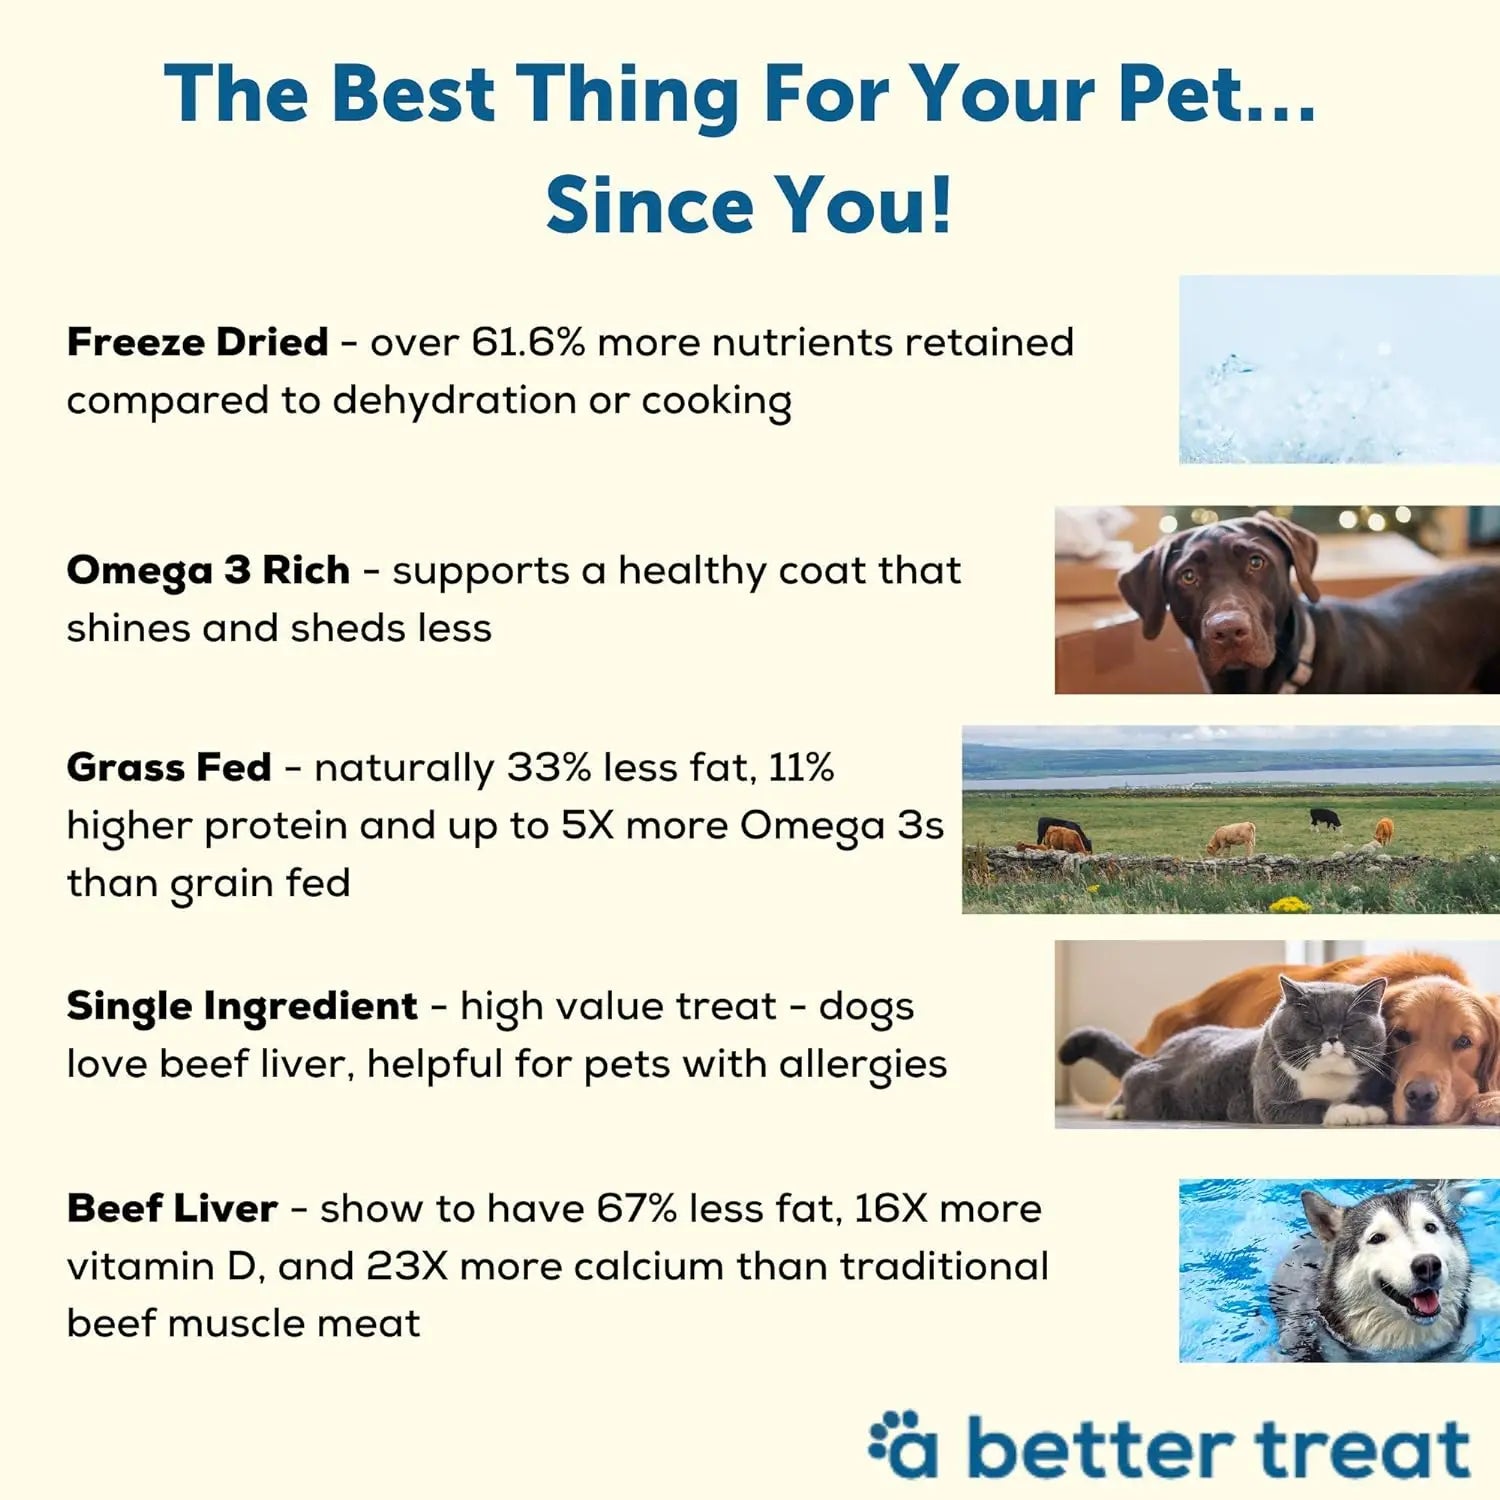 A Better Treat Freeze Dried Raw Grass Fed Beef Liver Dog and Cat Treats A Better Treat